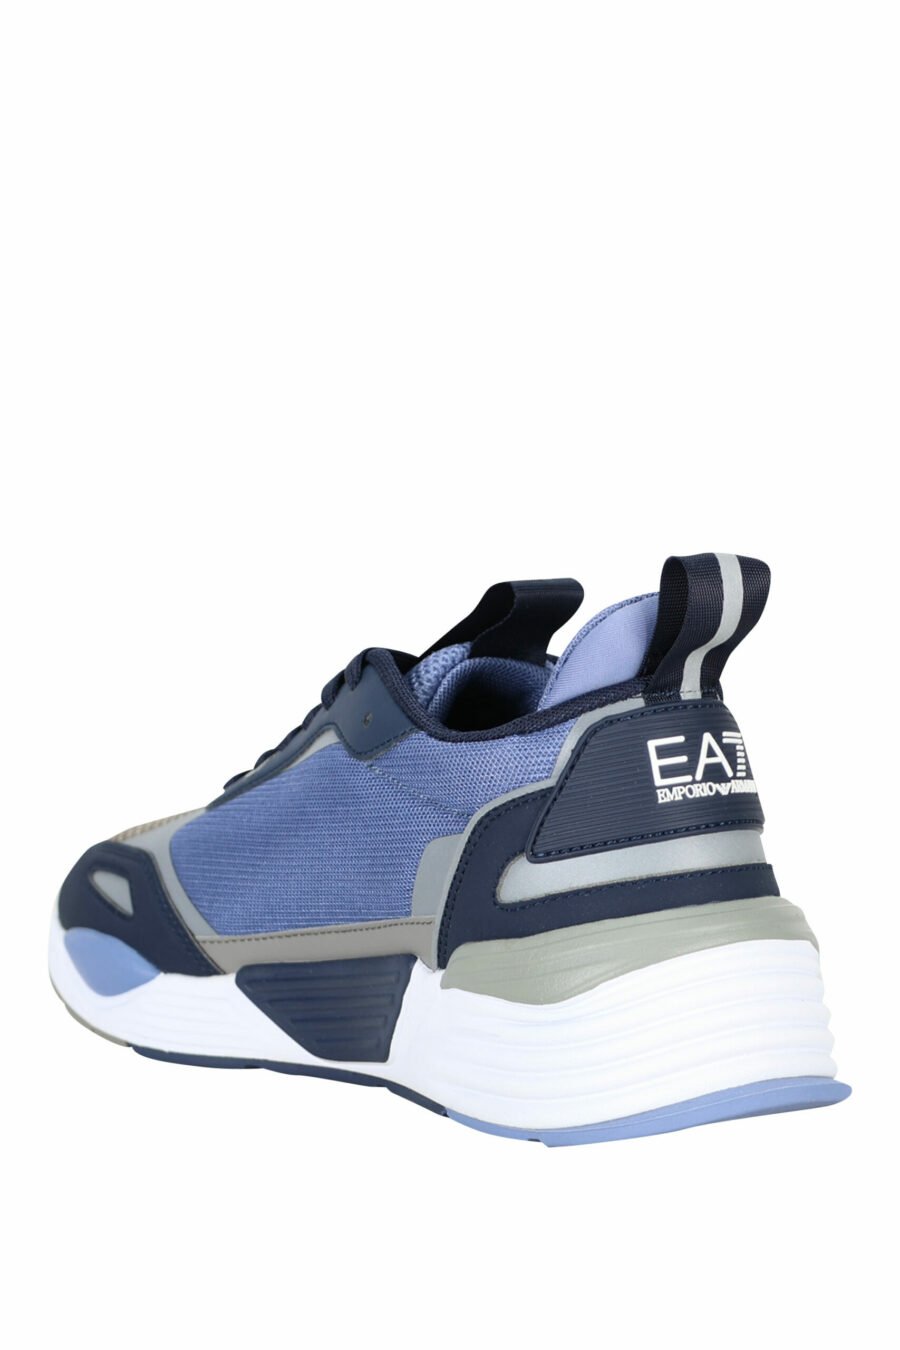 Trainers black with blue and grey with white eagle logo - 8056787461604 3 scaled